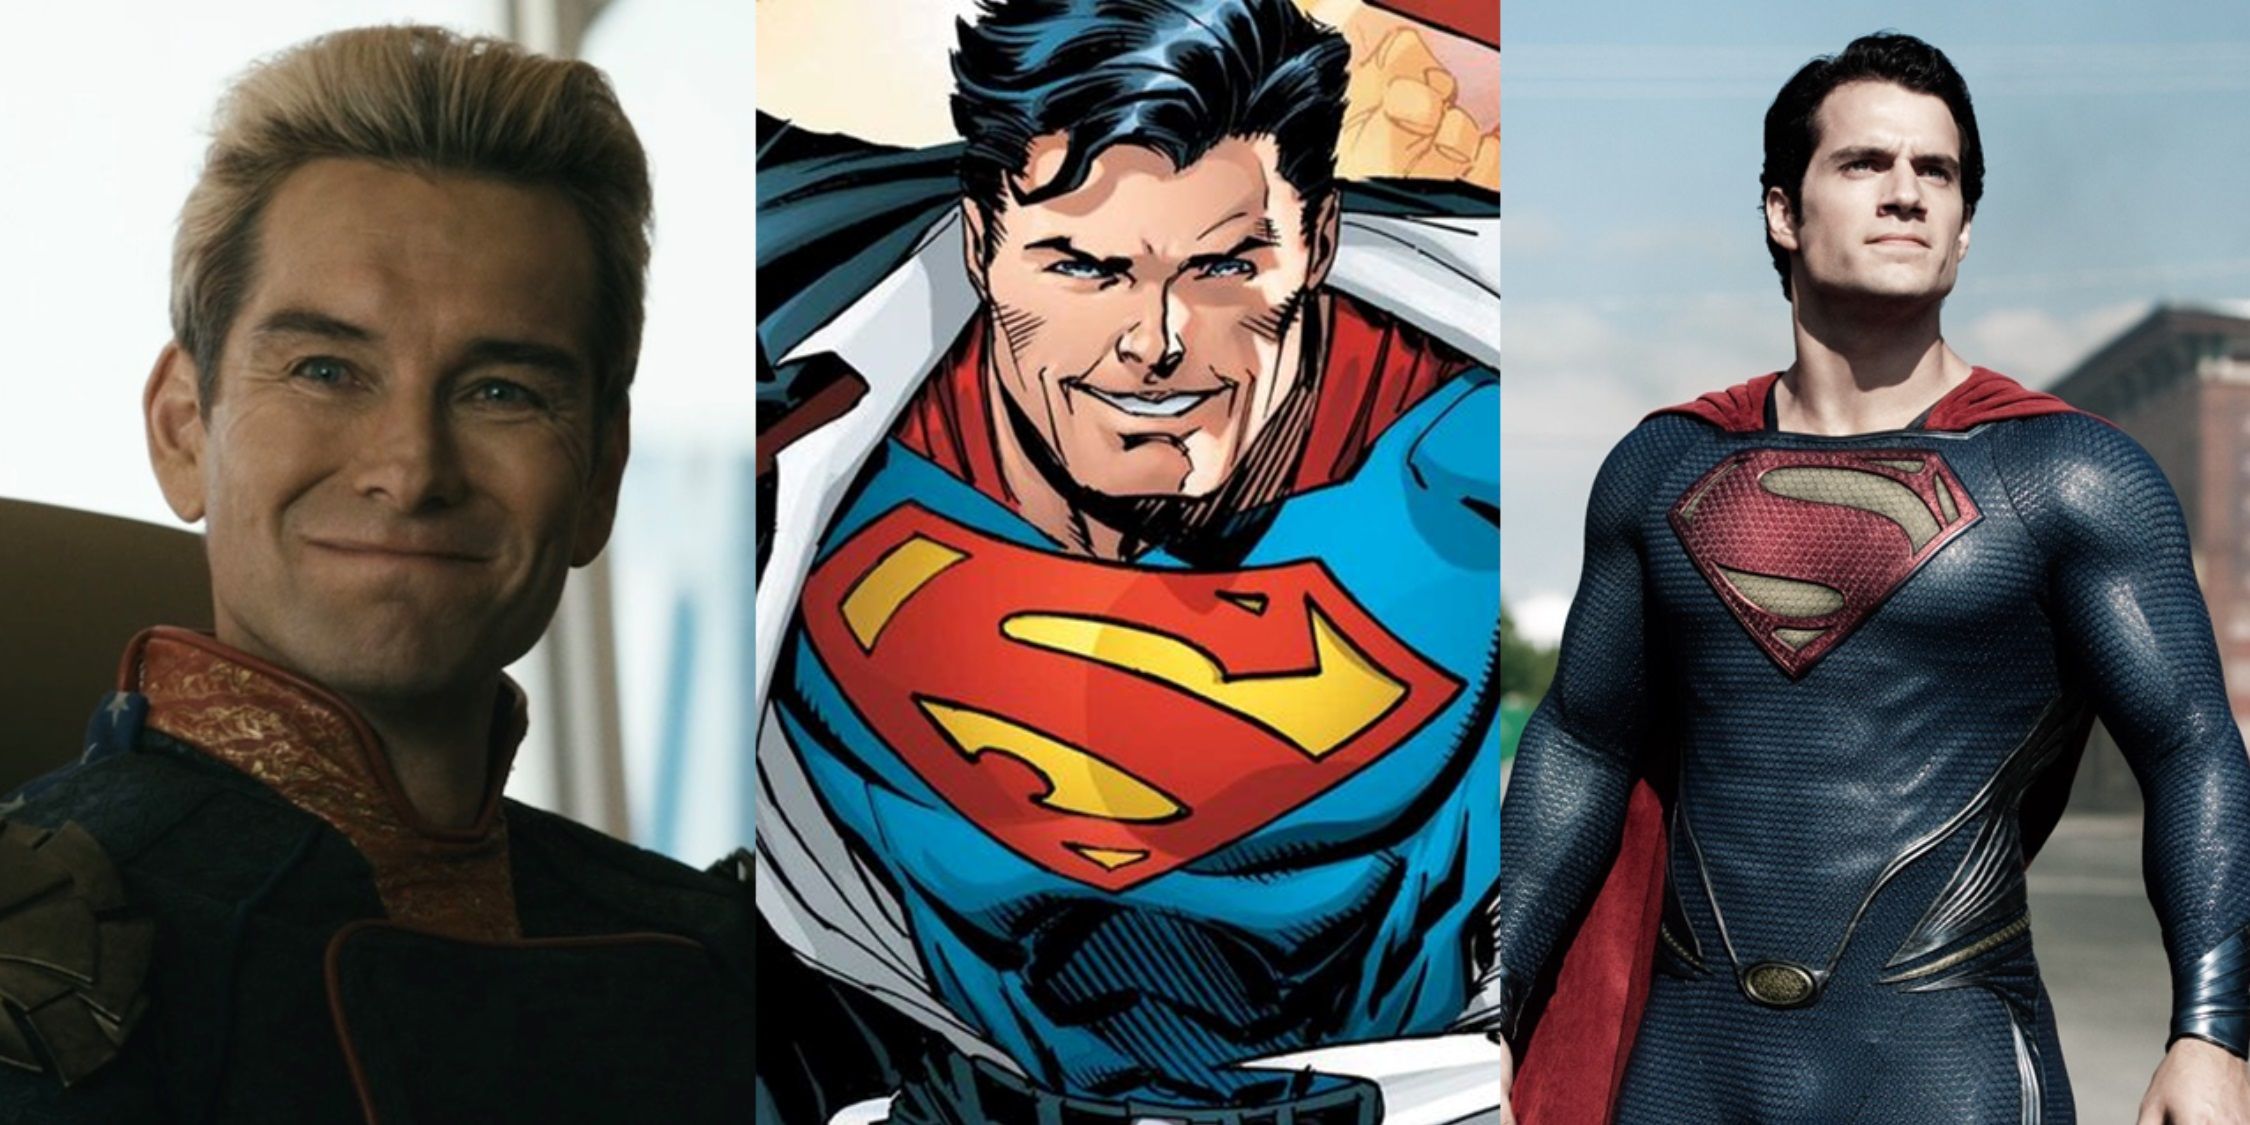 Split image of Homelander in The Boys, Superman in DC Comics, and Henry Cavill in Man of Steel